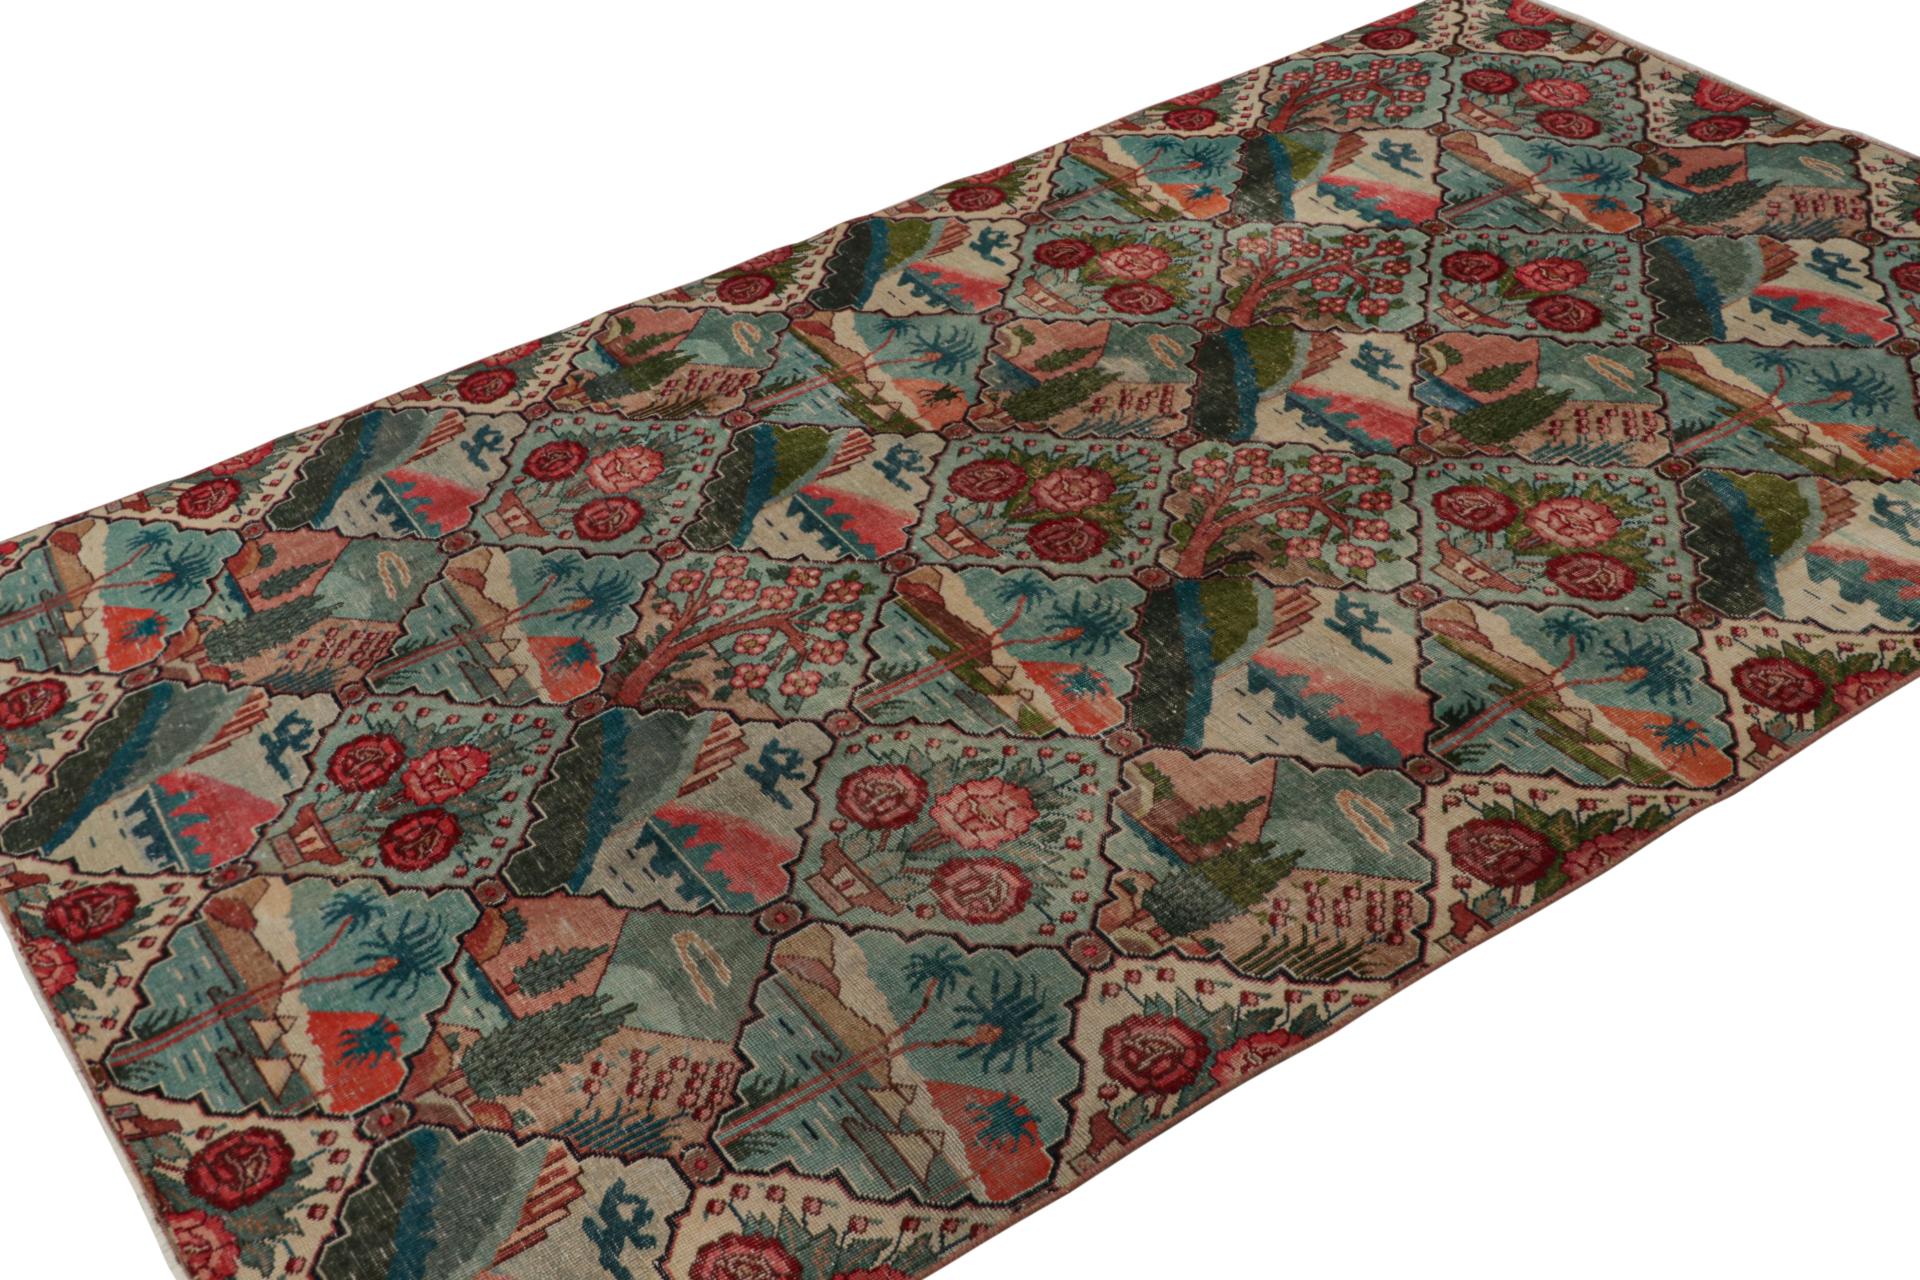 Hand-knotted in luxurious wool, this 6x9 vintage Tabriz style rug with a quilt-like range of design scenes, seems to be a mid-century Turkish take on Persian pictorials of the past. 

On the Design: 

Keen eyes for detail will admire the patterns on